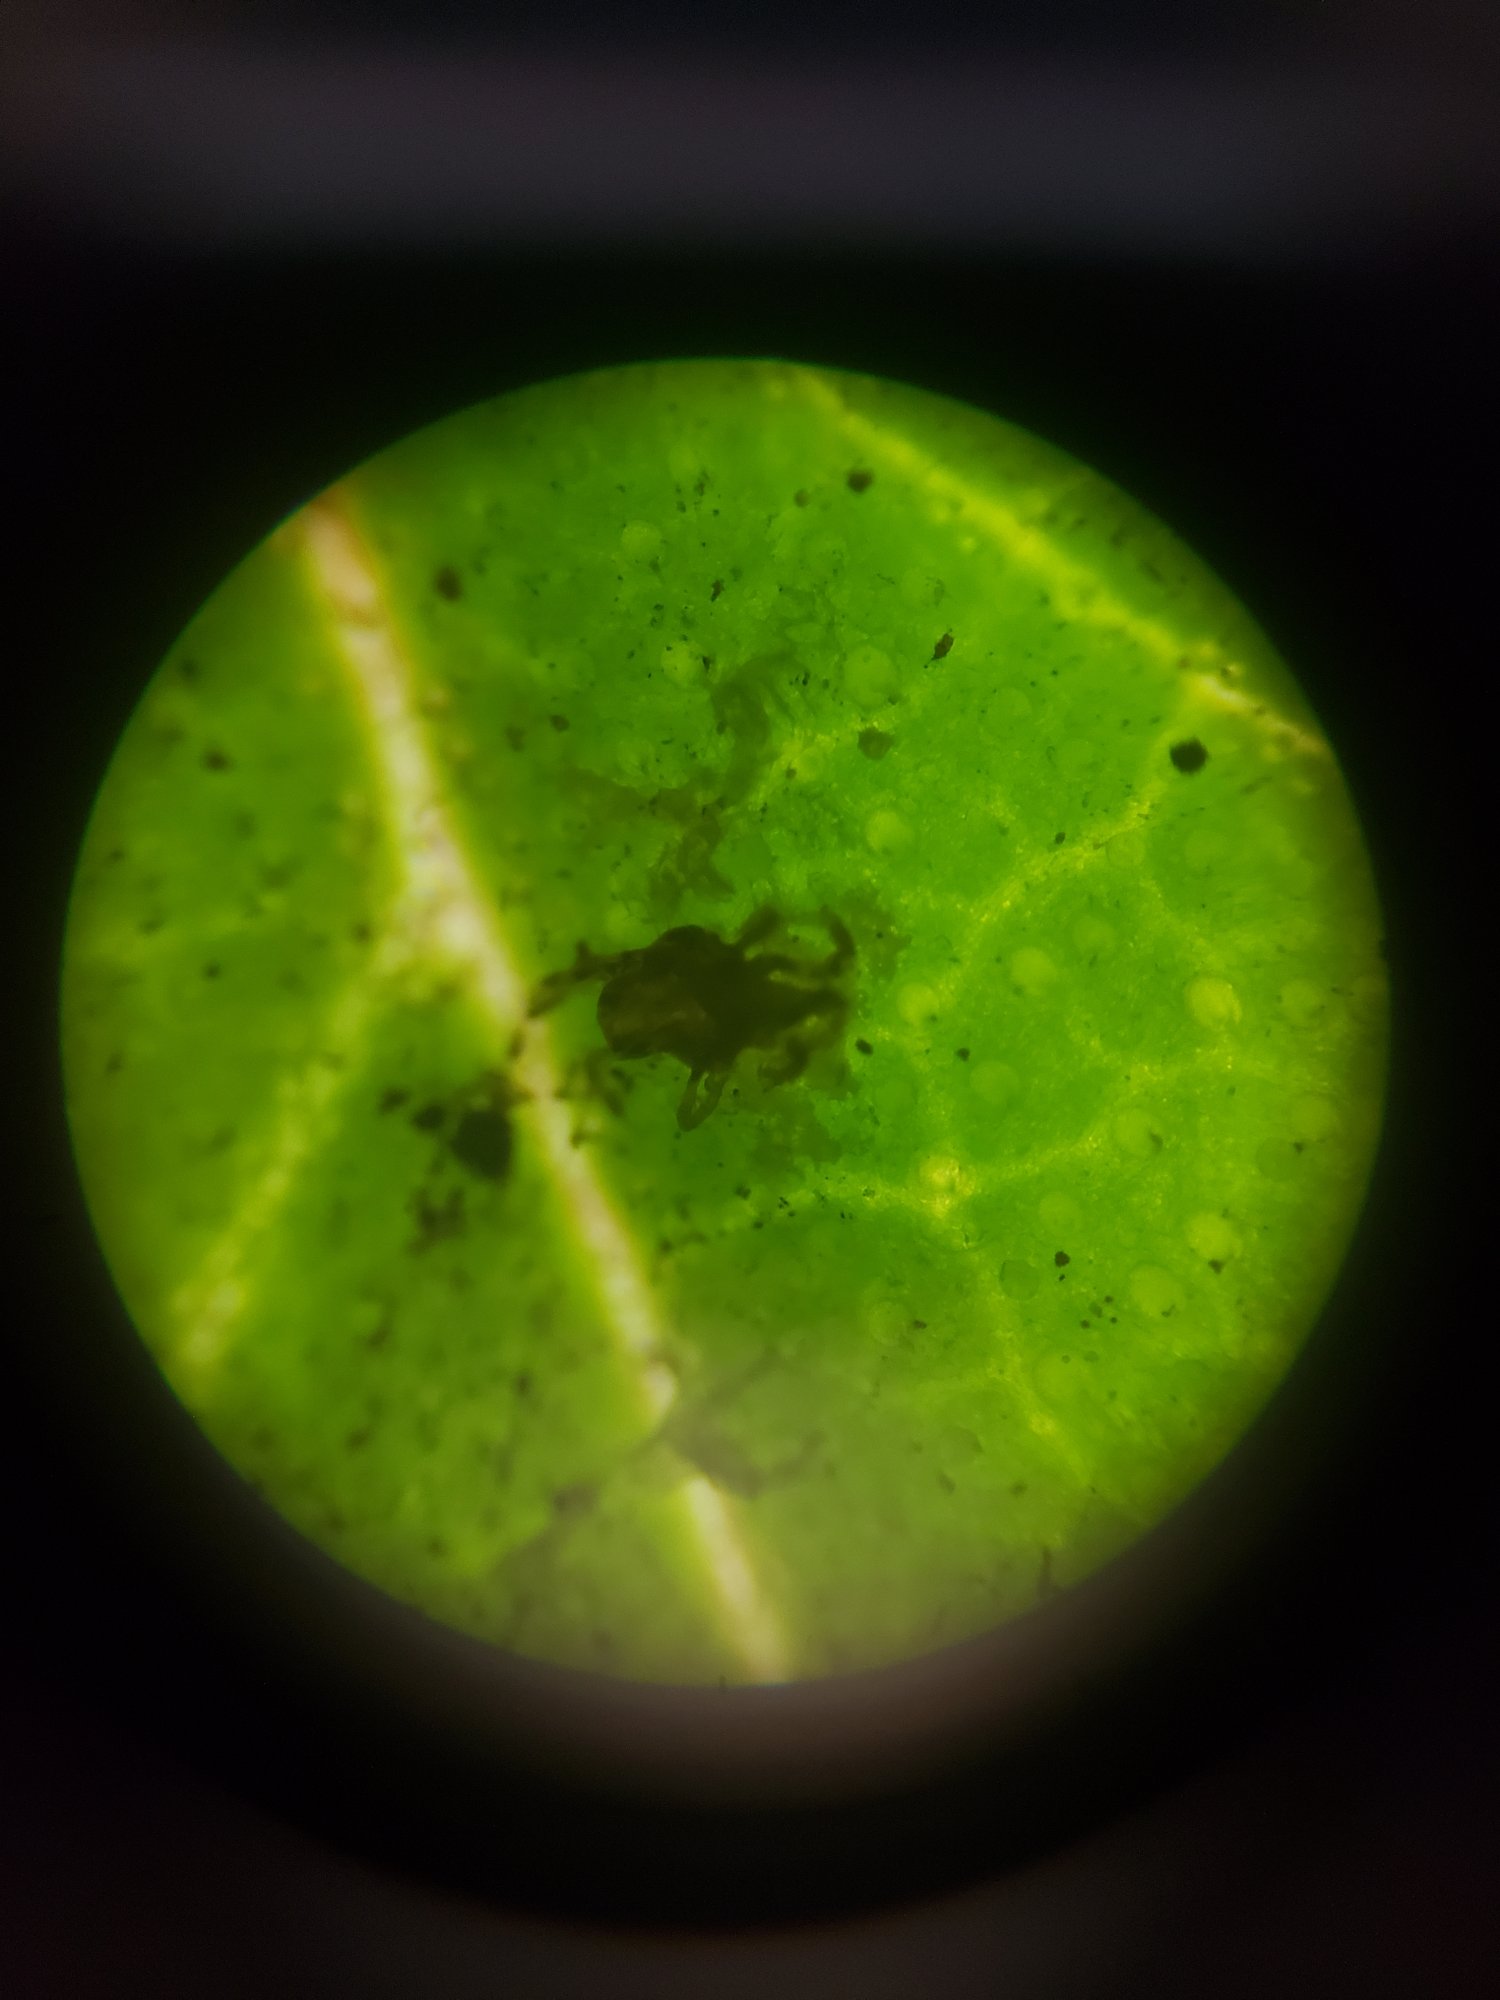 Spider mite on 1 plant pics included 3